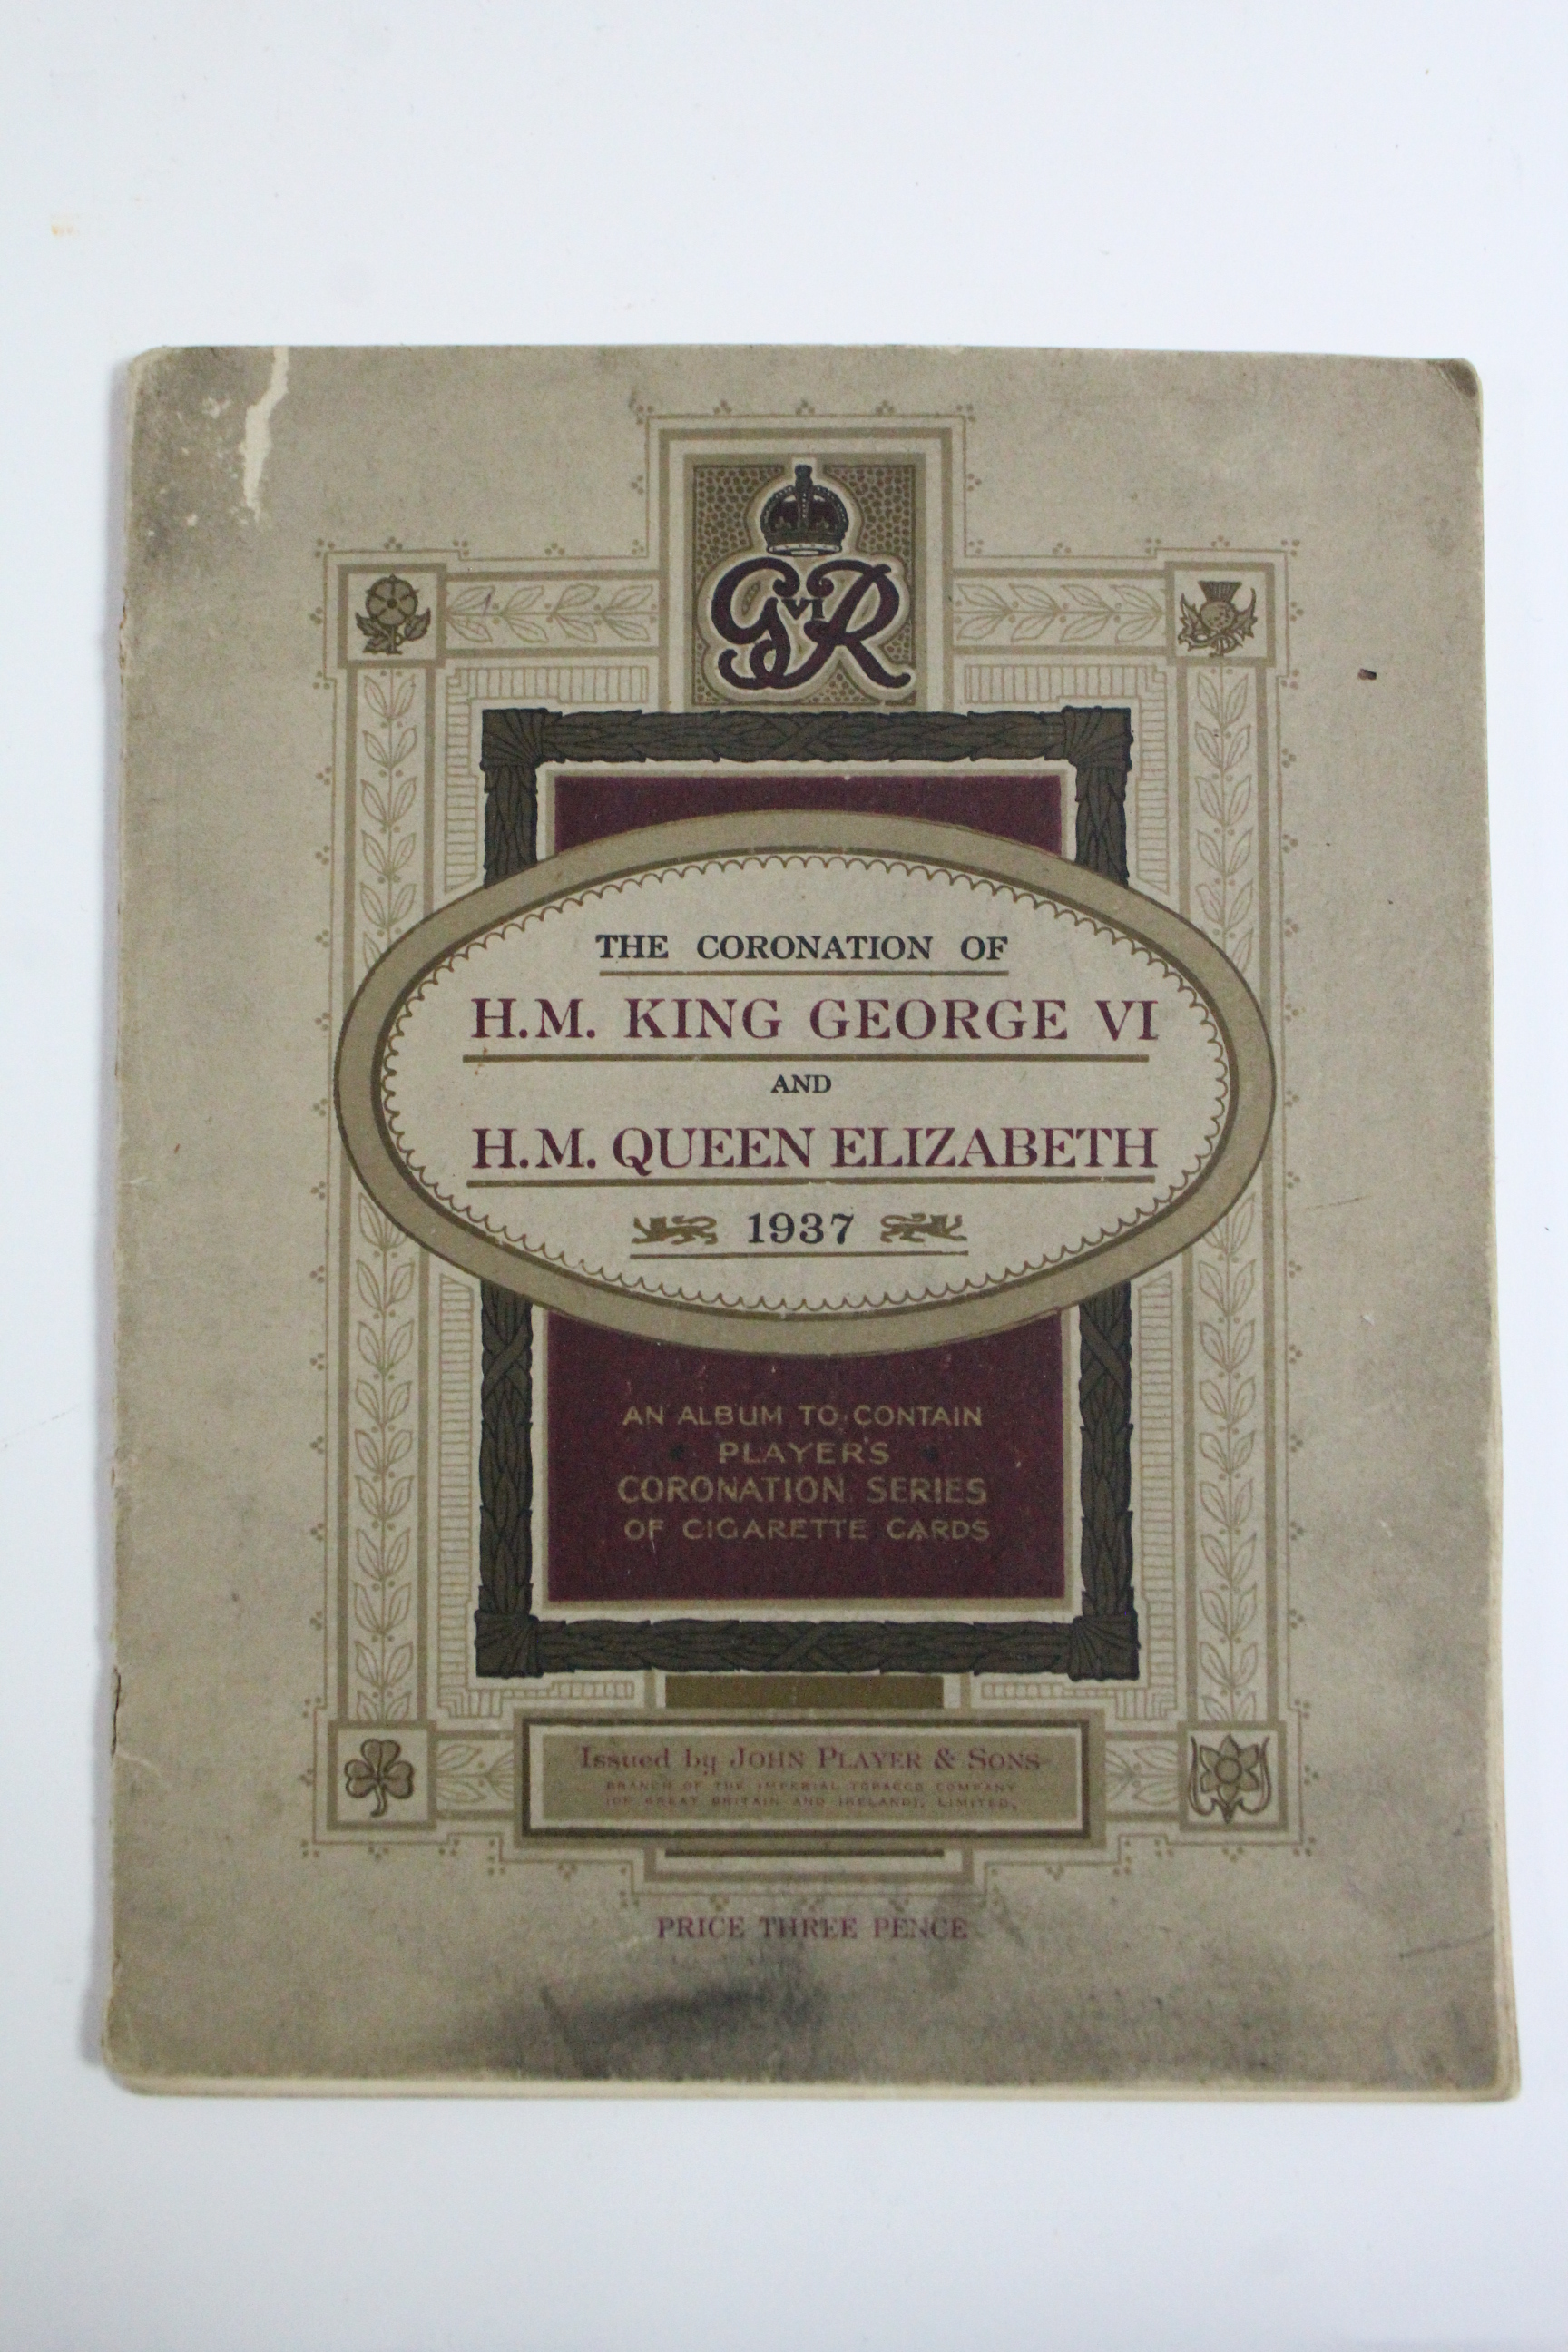 A John Player cigarette picture card album “The Coronation of H.M. King George VI and H.M. Queen